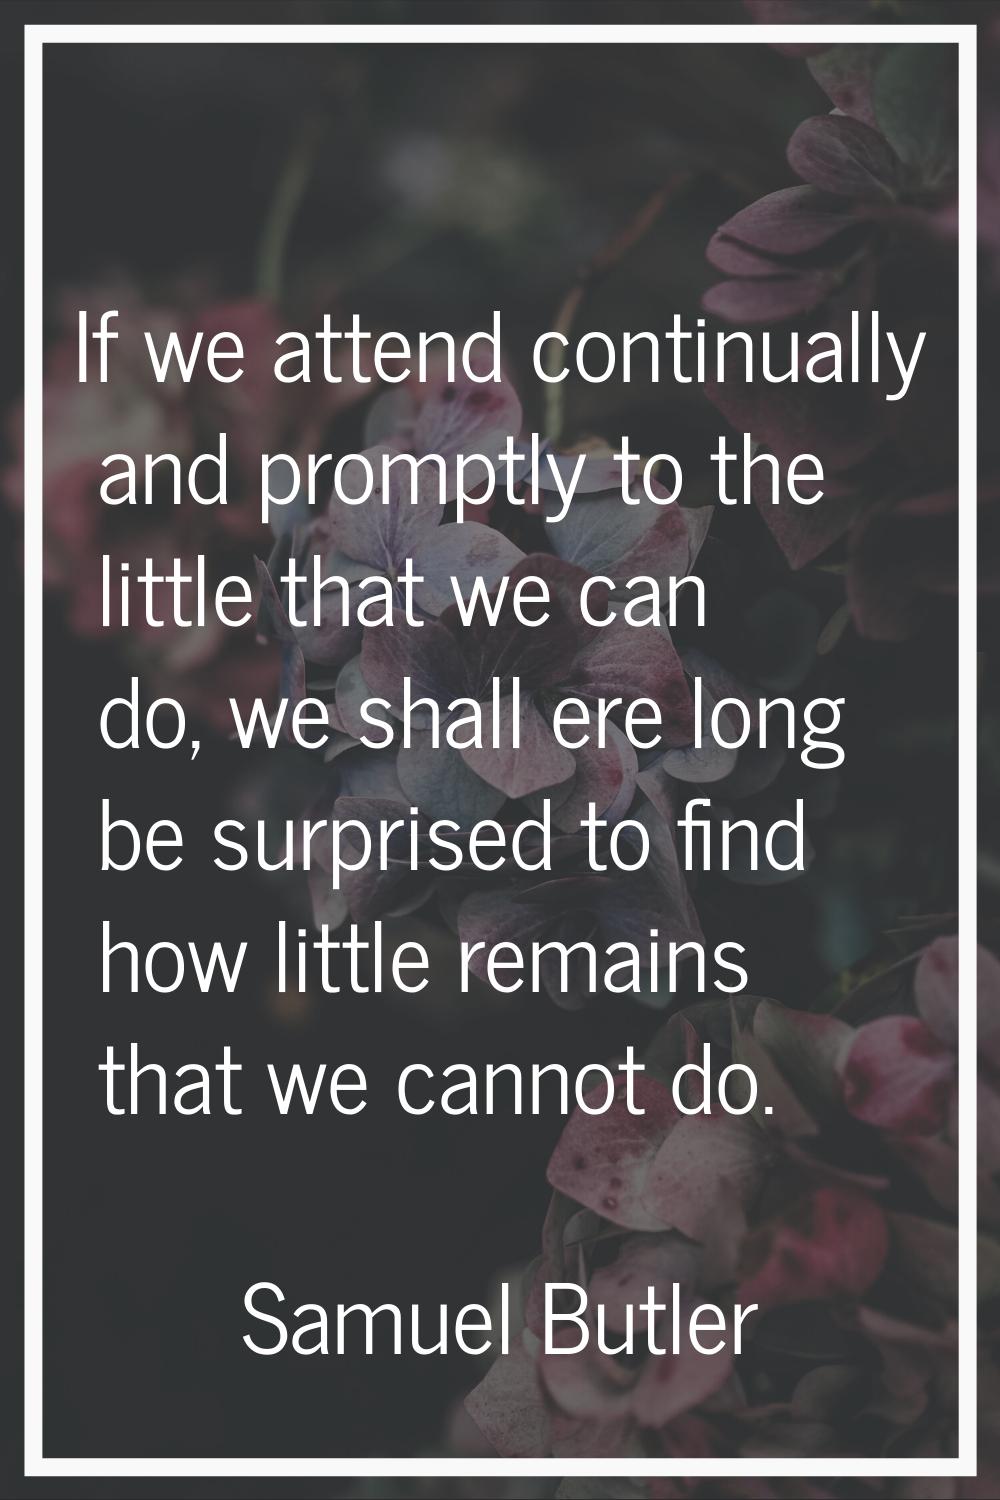 If we attend continually and promptly to the little that we can do, we shall ere long be surprised 